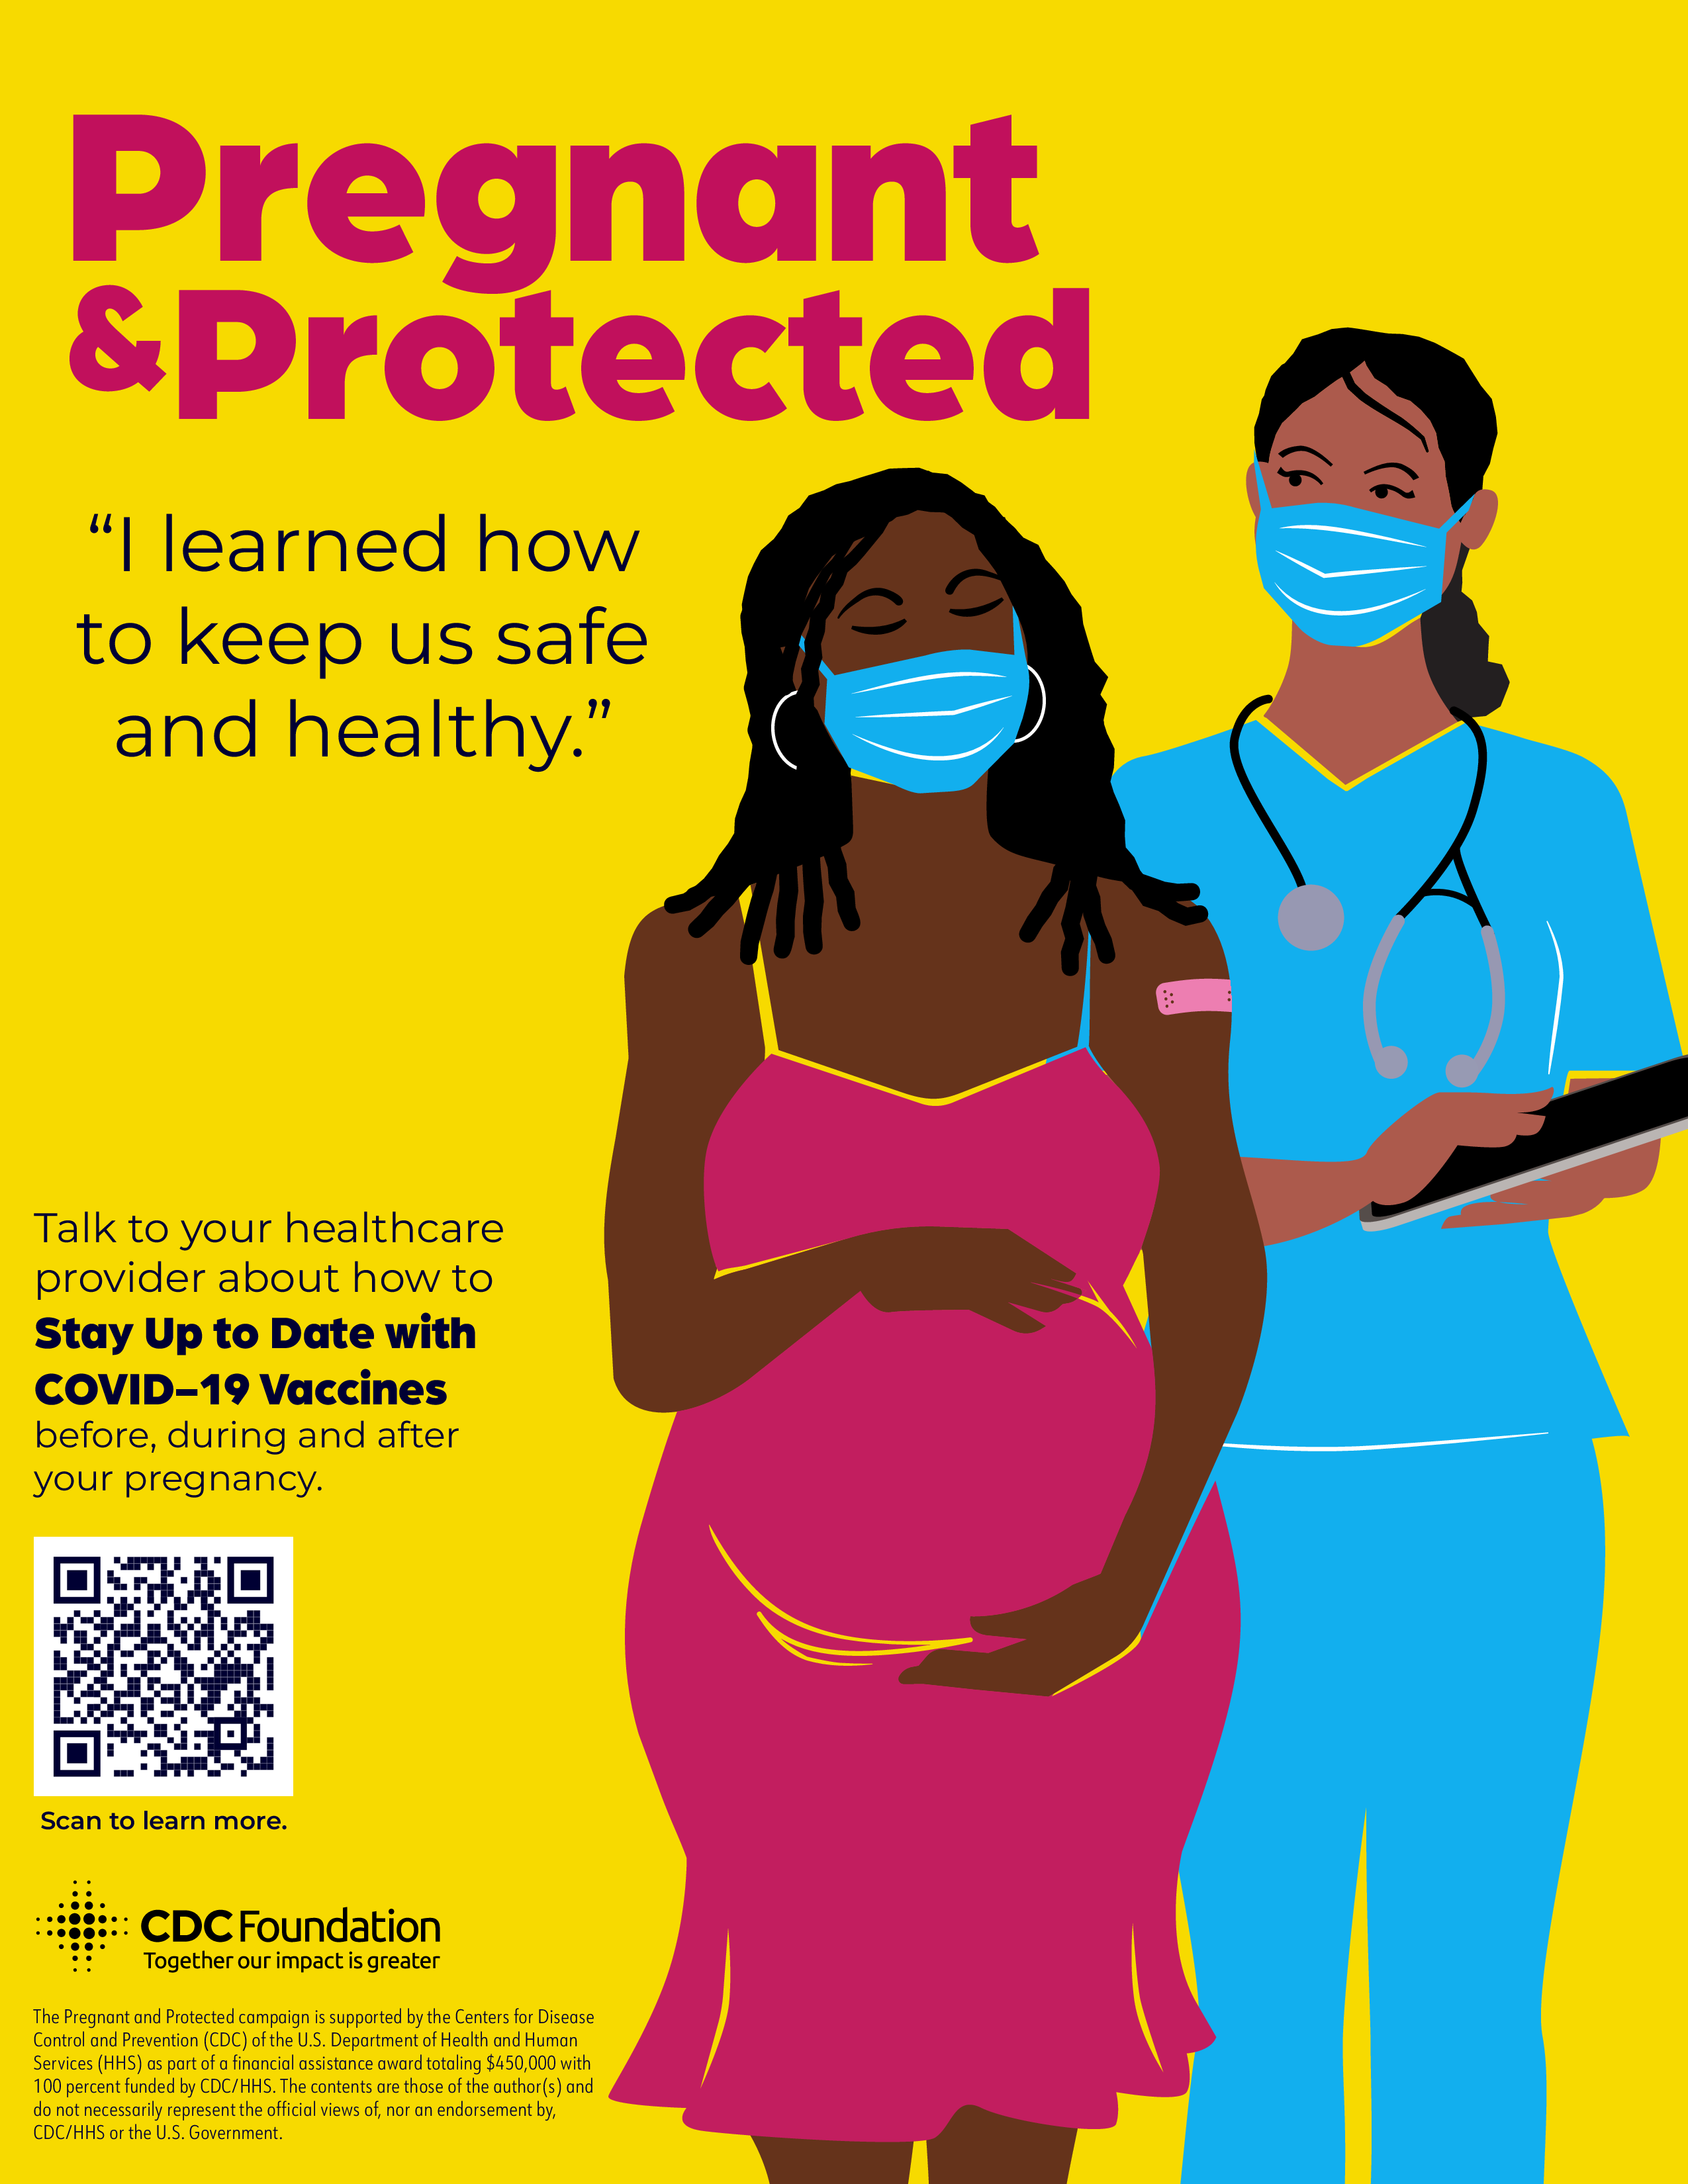 A black woman holds her pregnancy and stands next to a health care provider